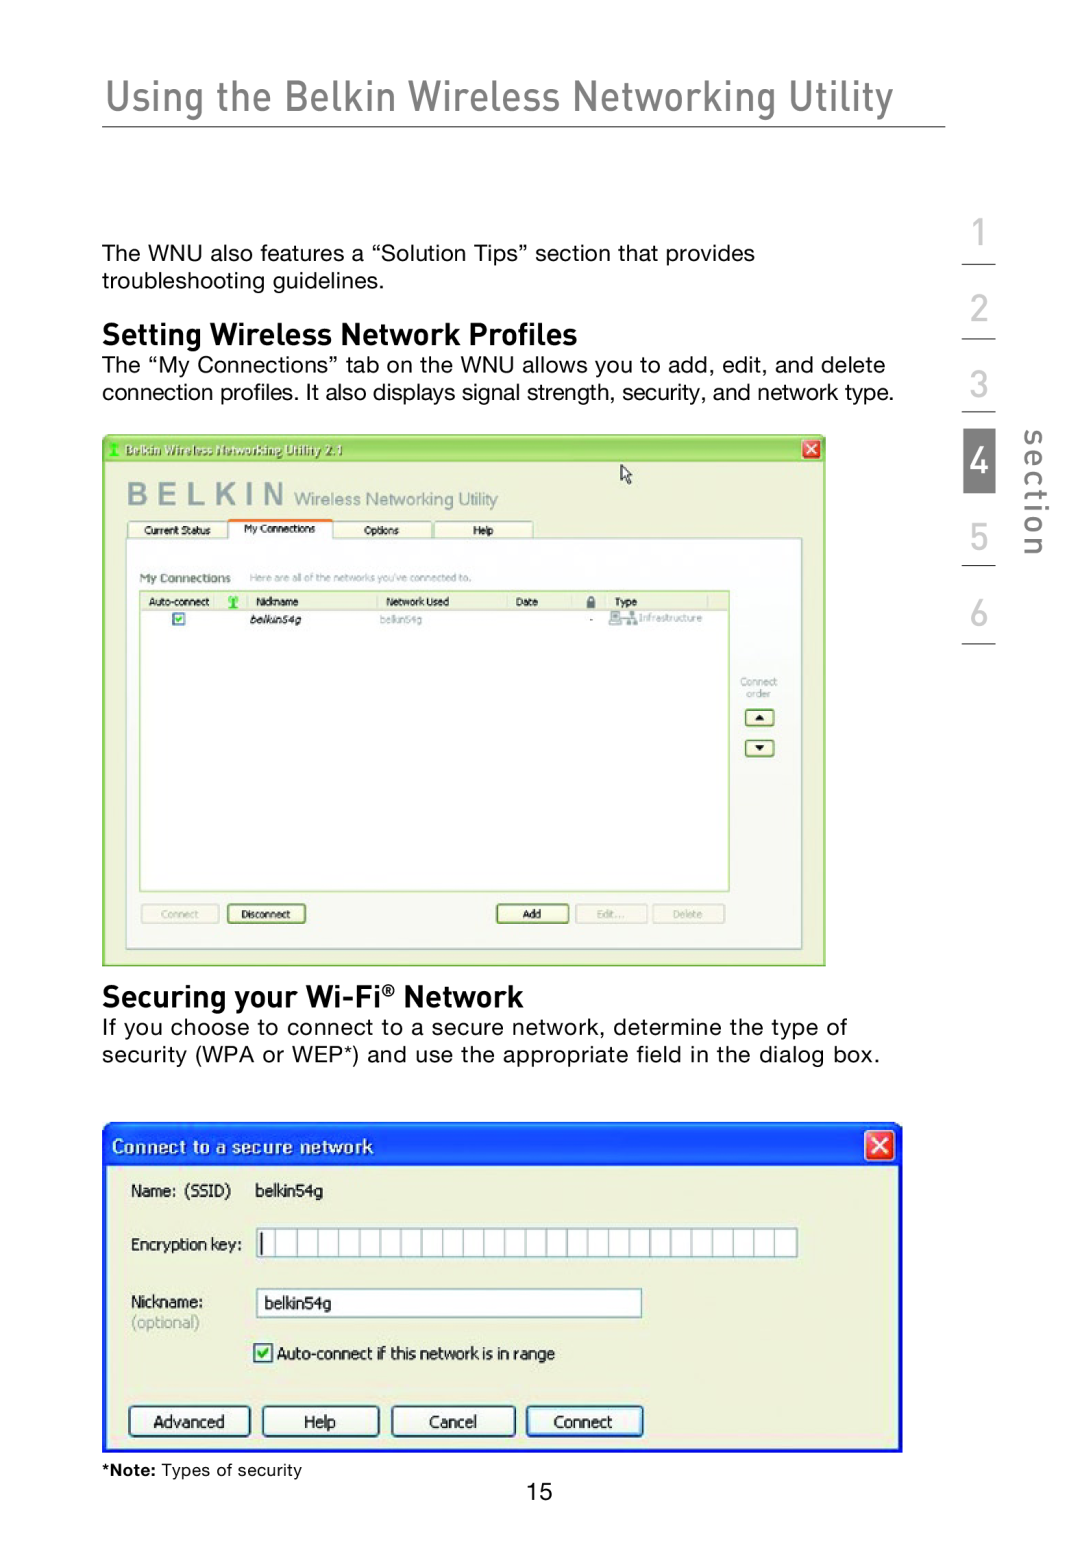 Belkin P74471EA-B manual Setting Wireless Network Profiles, Securing your Wi-Fi Network, section, Note Types of security 